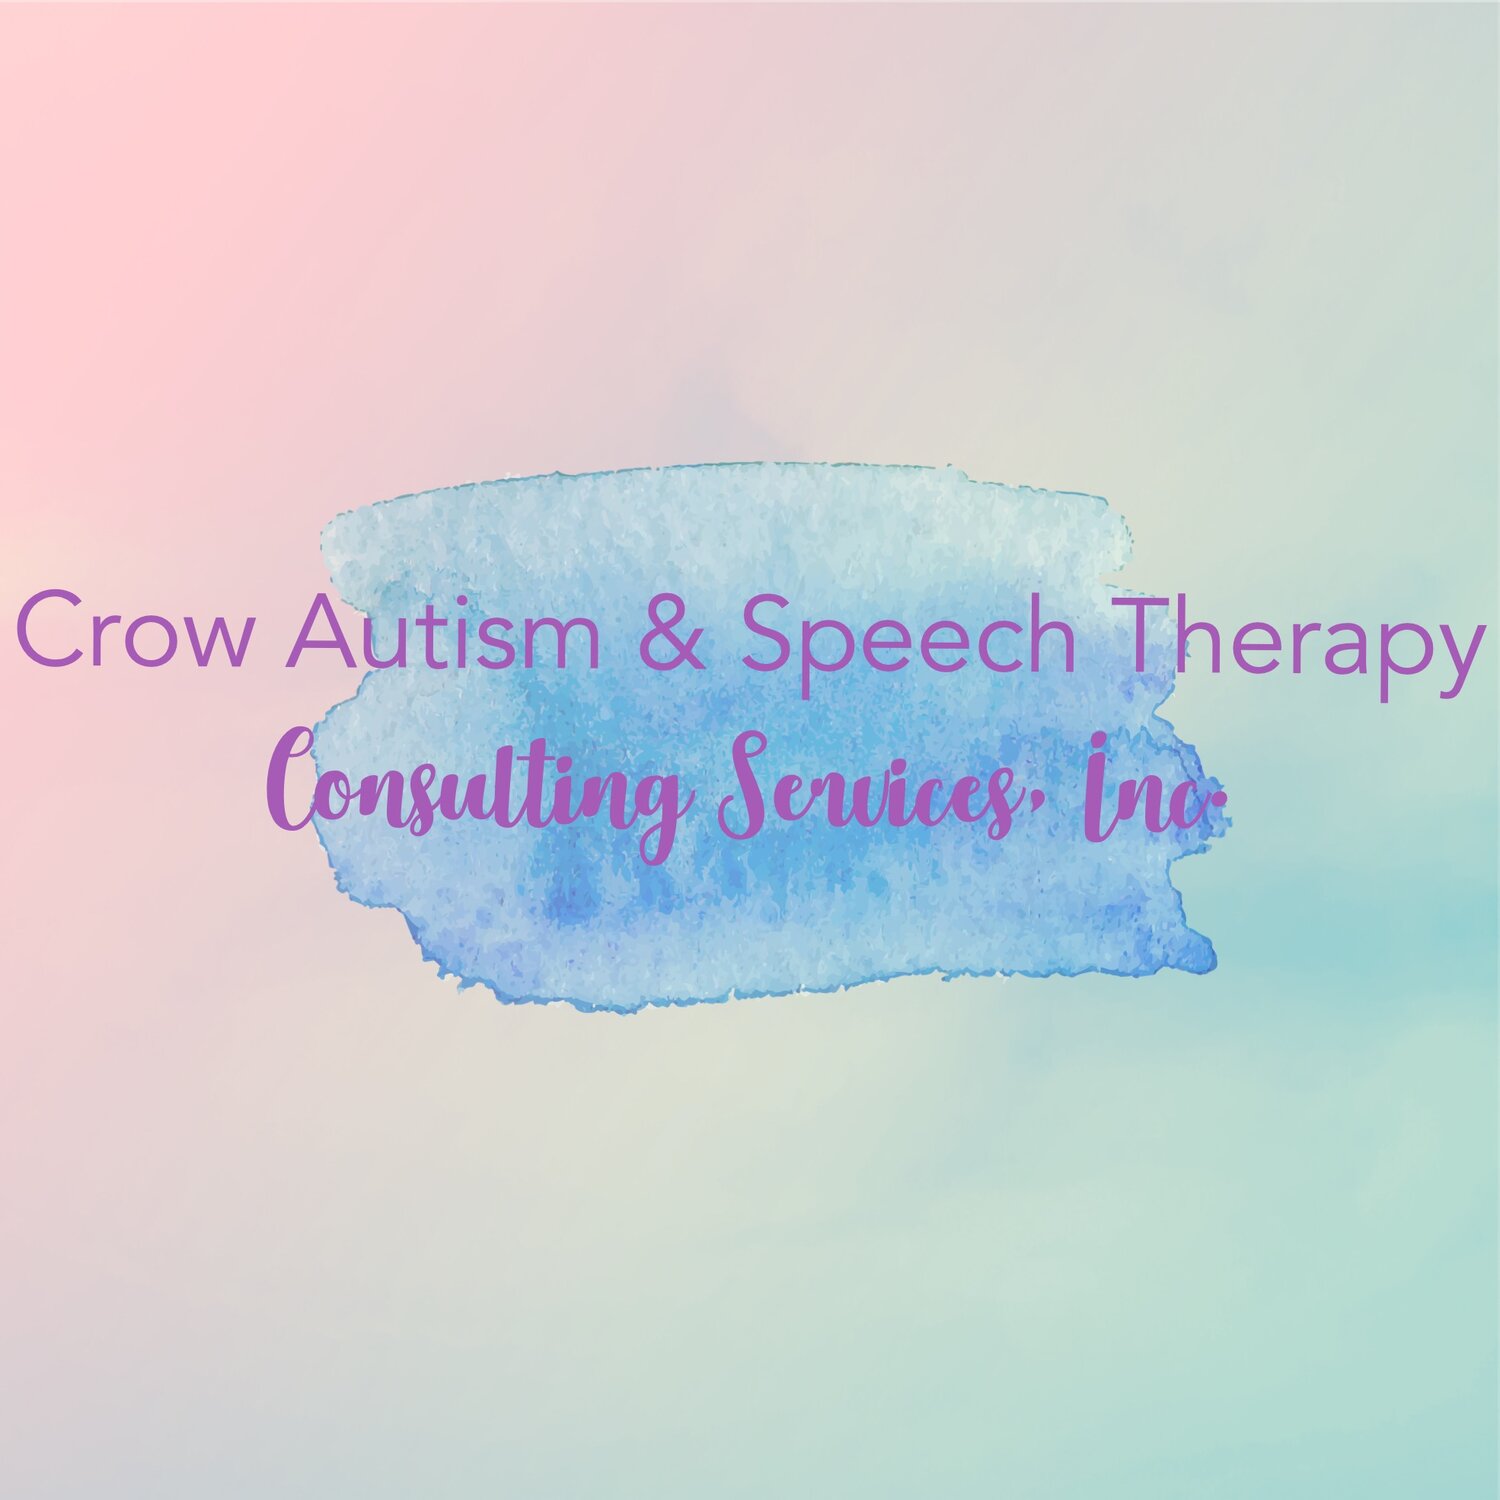 Crow Autism &amp; Speech Therapy Consulting Services, Inc.